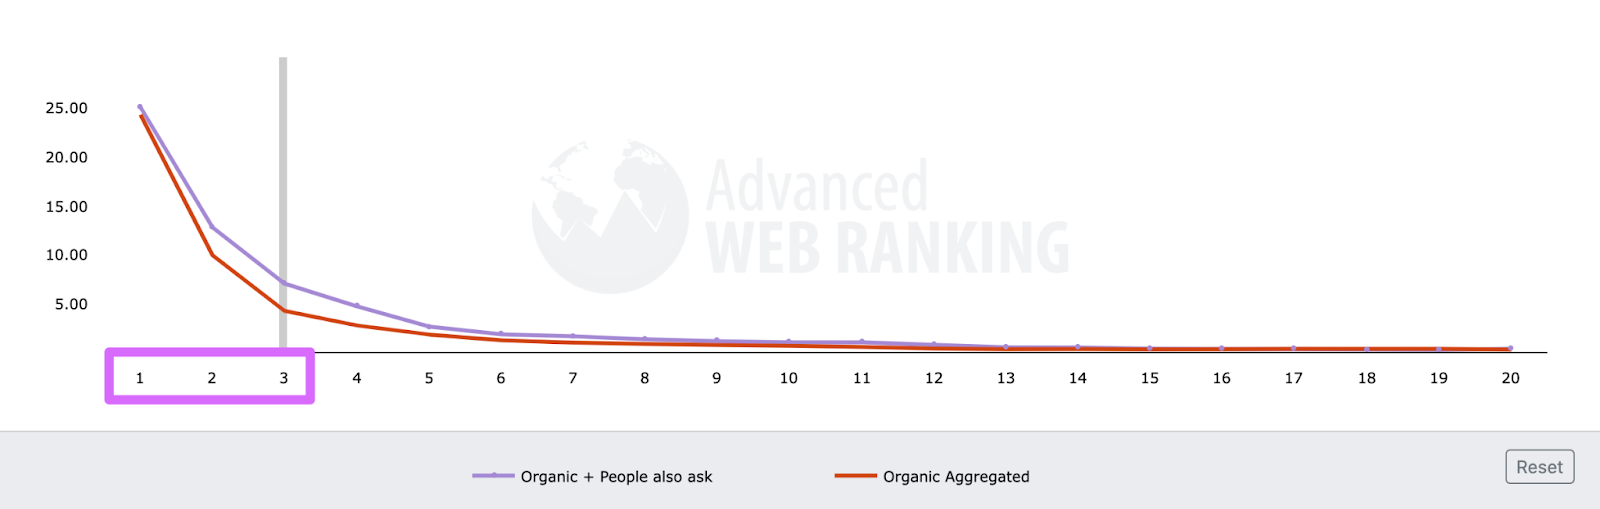 search results positioning and ctr history with top 3 spots getting the most clicks